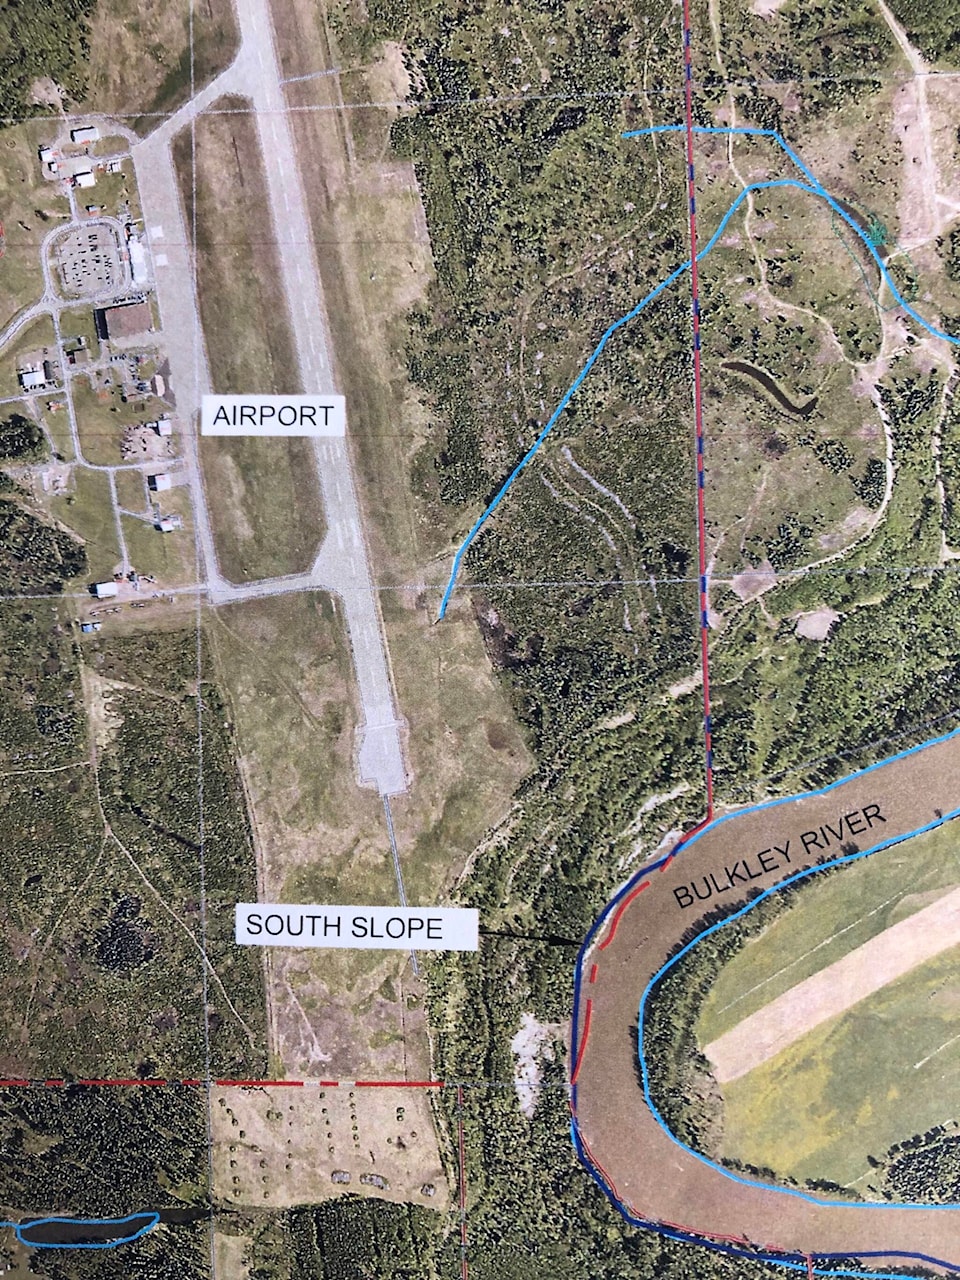 31754088_web1_230209-SIN-SMITHERS-AIRPORT-RIVER-PROJECT-sitemap_1